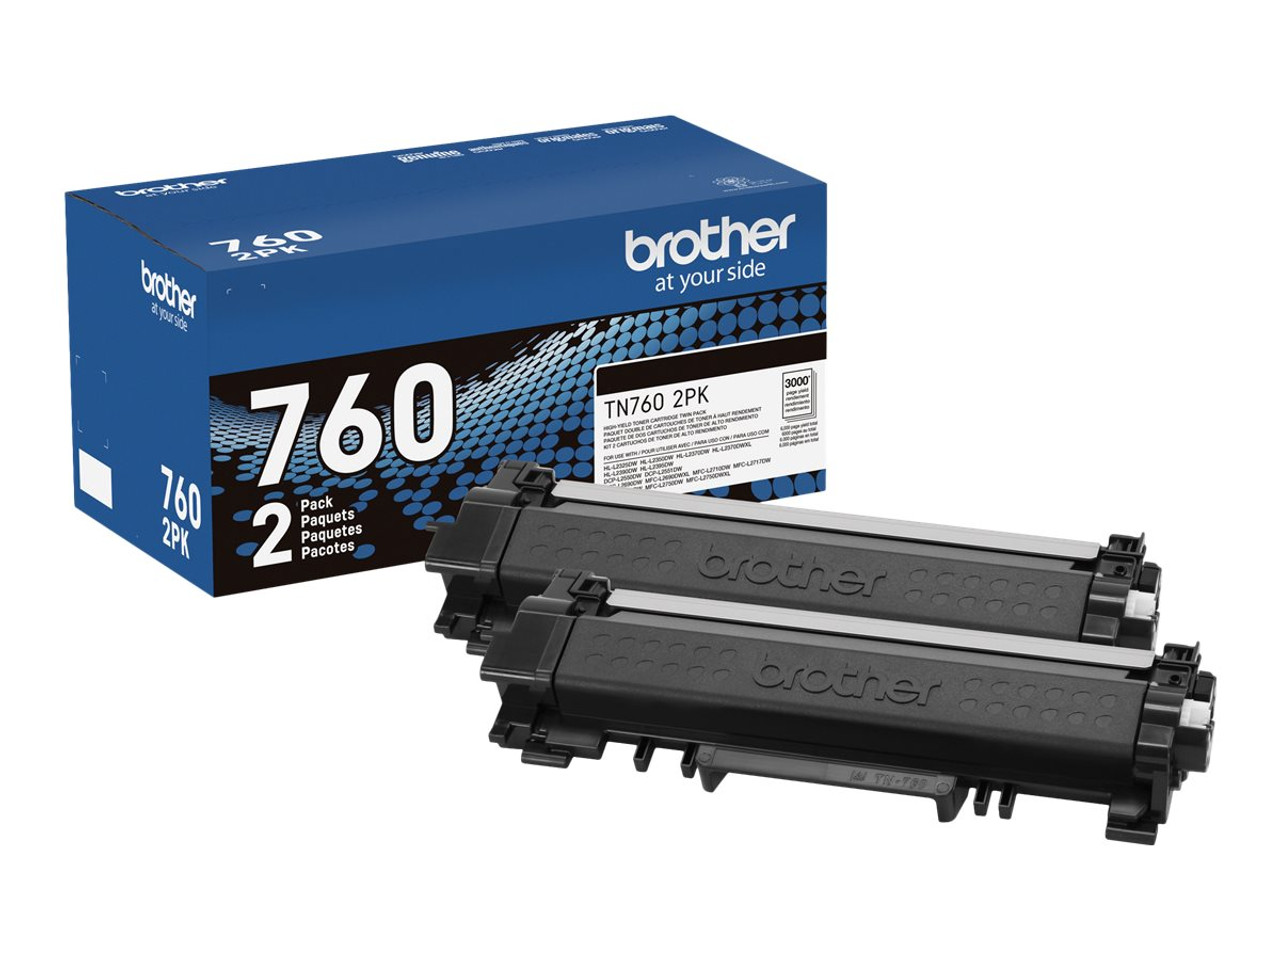 Brother MFC-L2710DW All-in-One Monochrome Printer with TN760